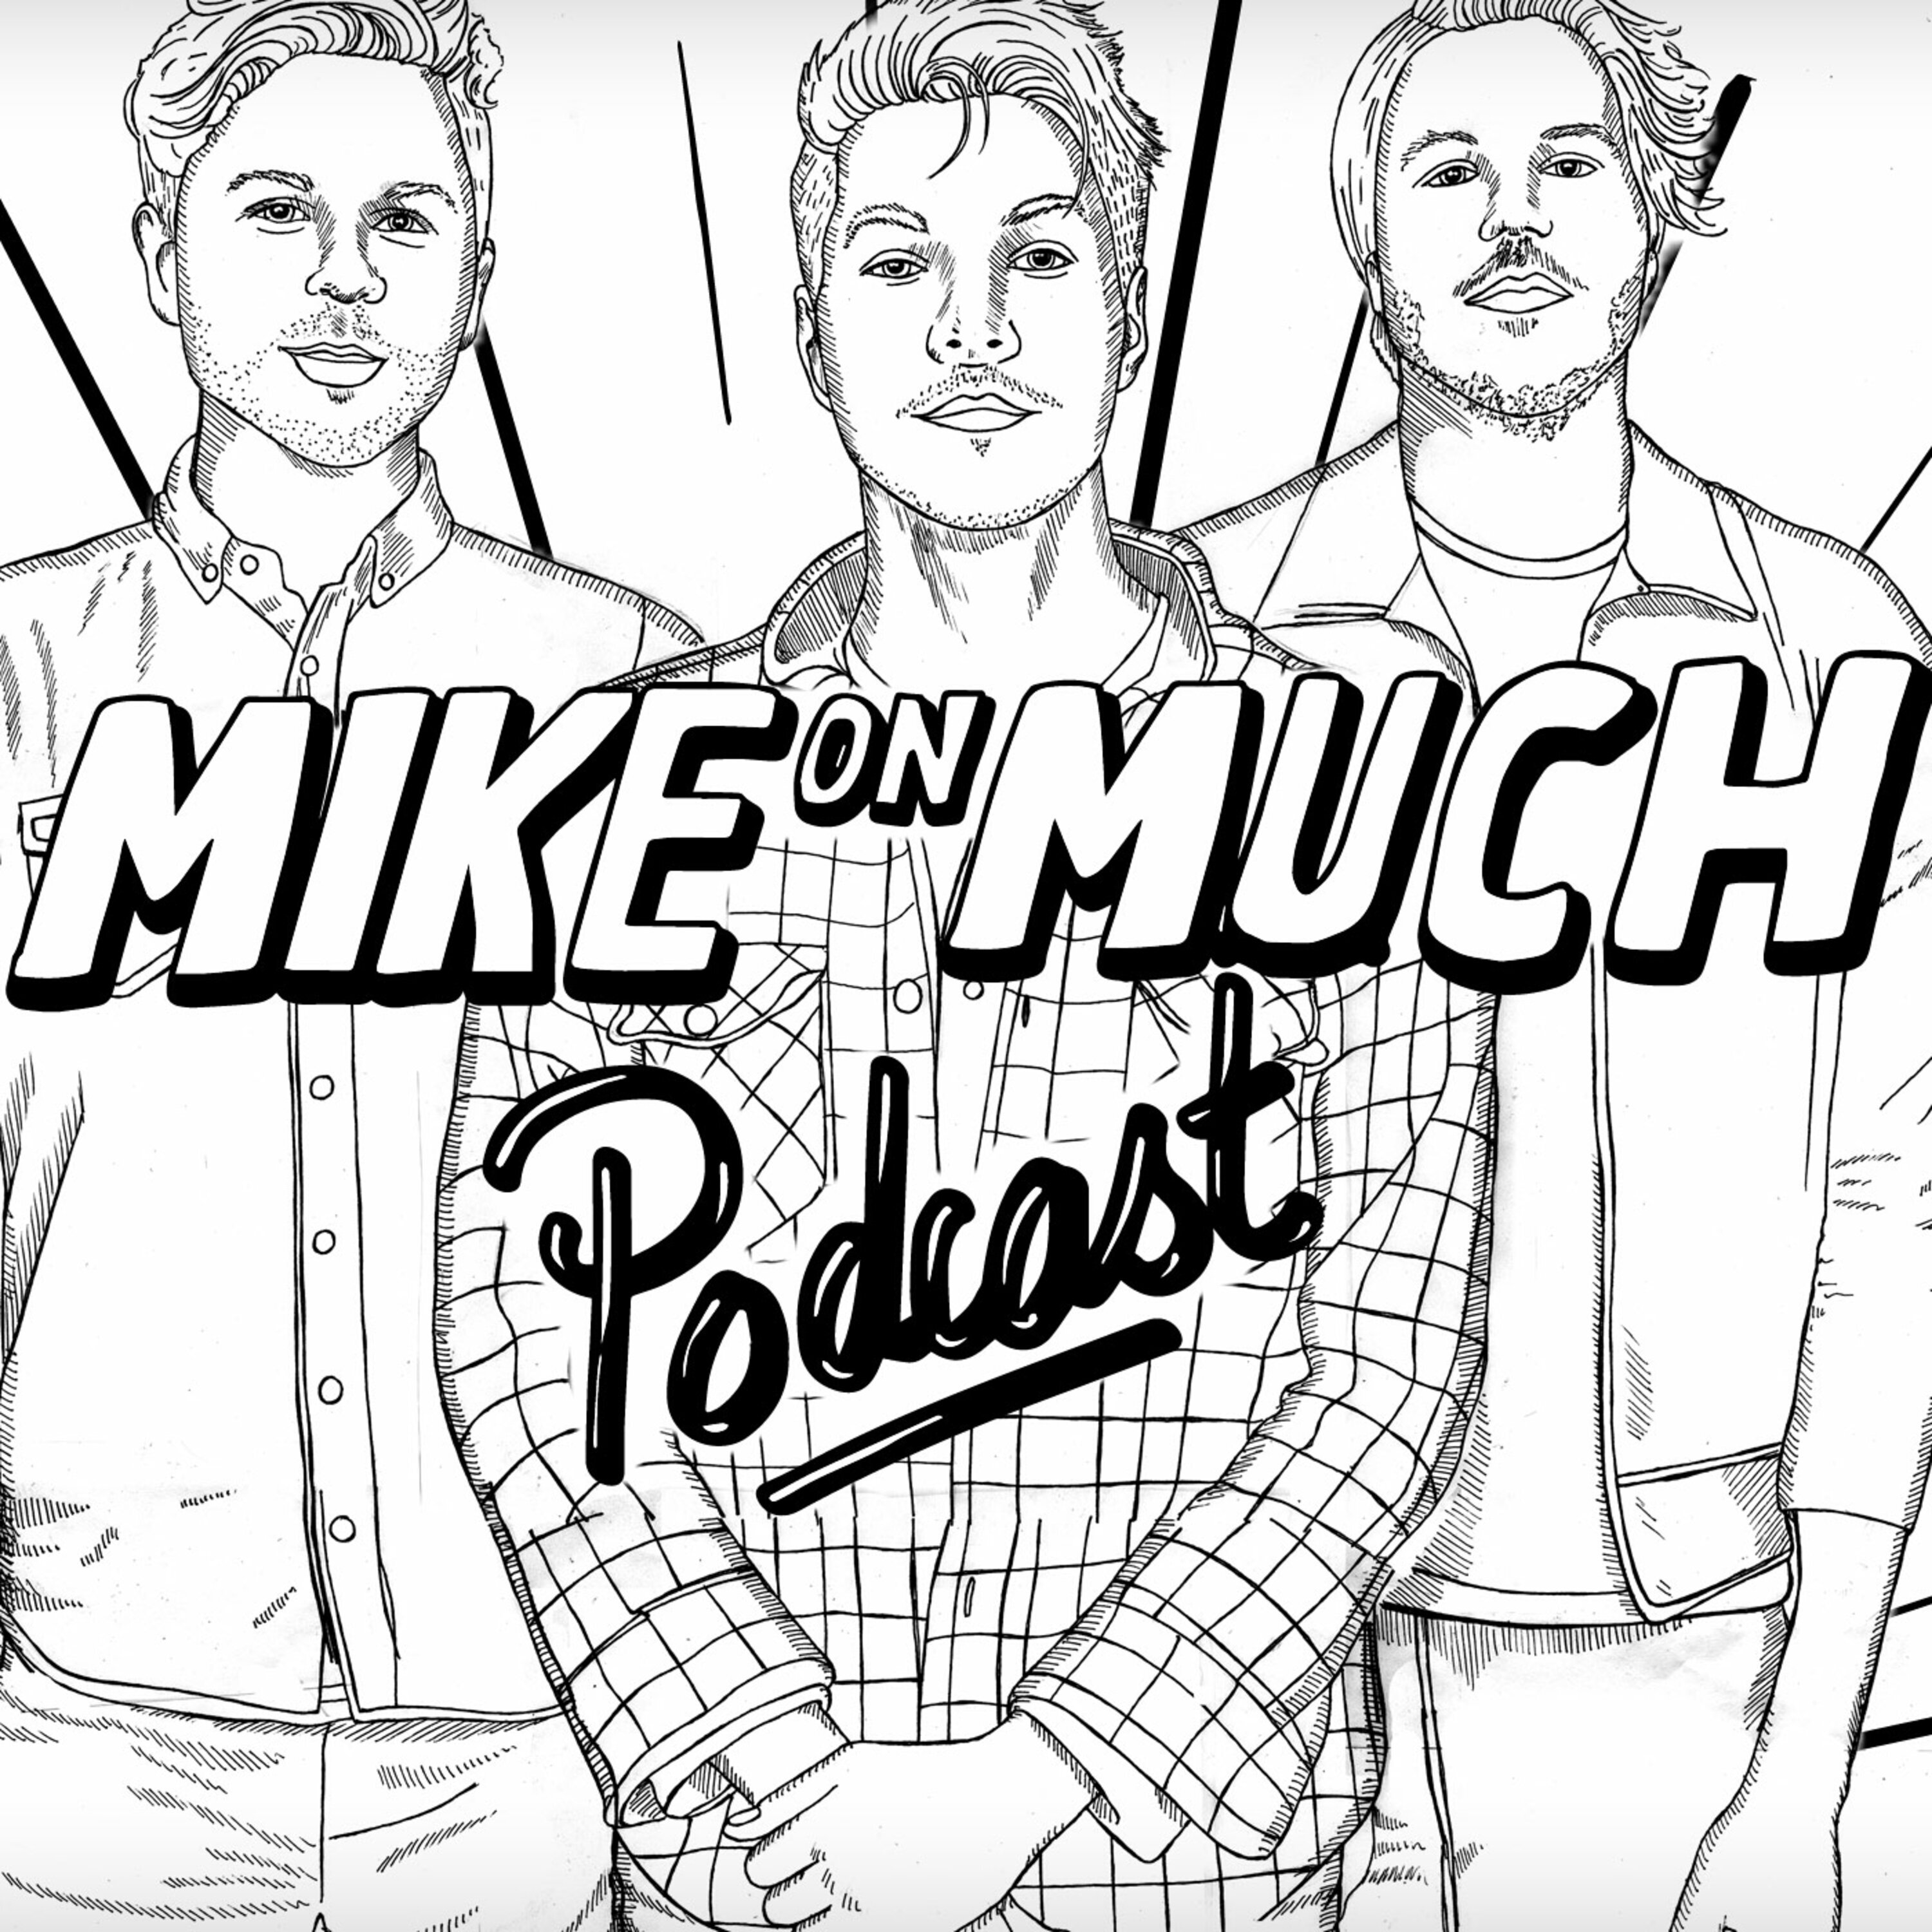 Season 1 Mike On Much: “Don’t Put That Burden On Me”